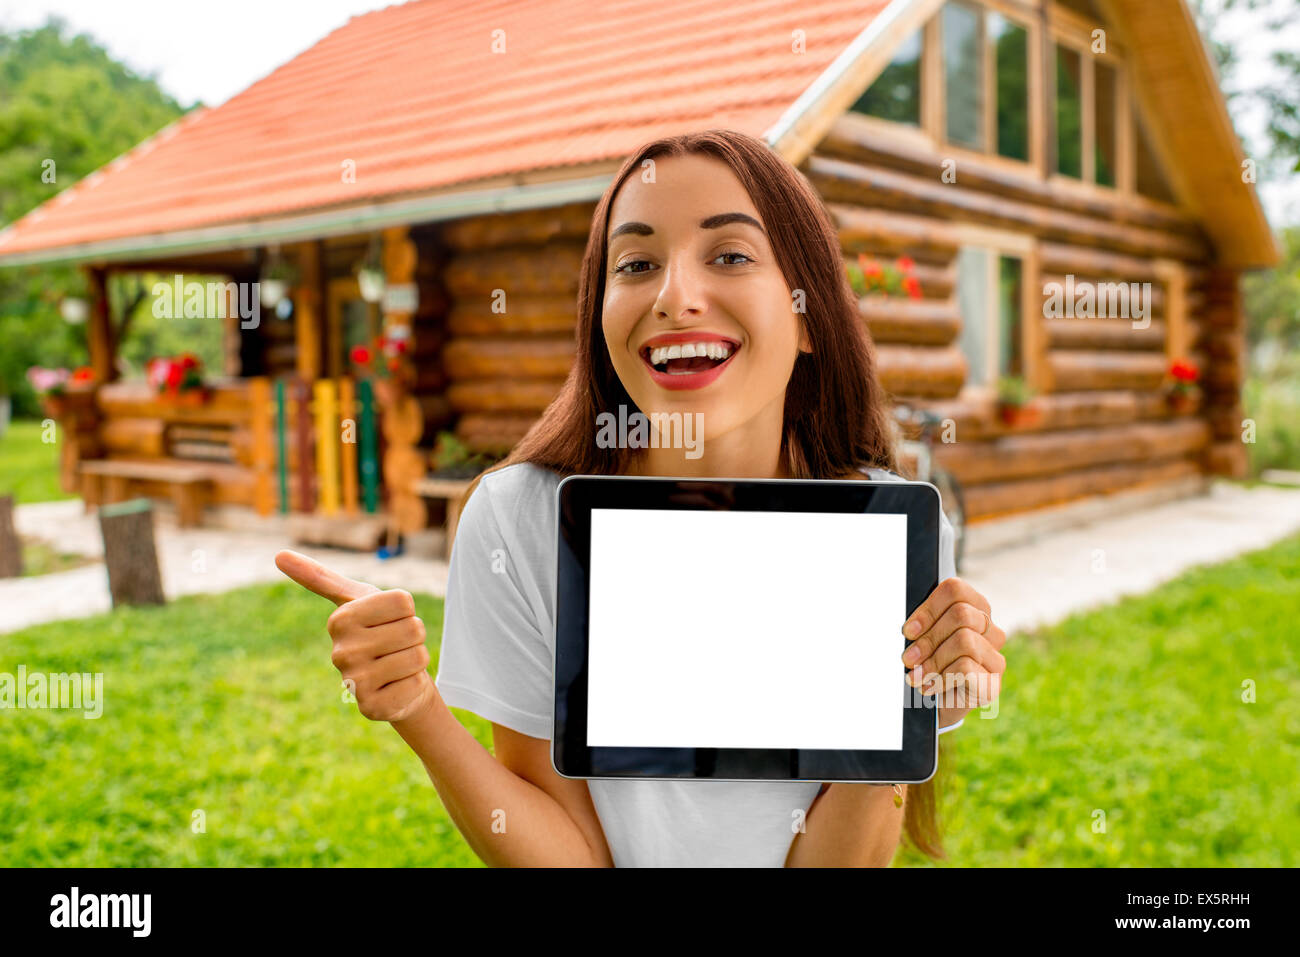 Woman showing digital tablet near the wooden cottage. Stock Photo